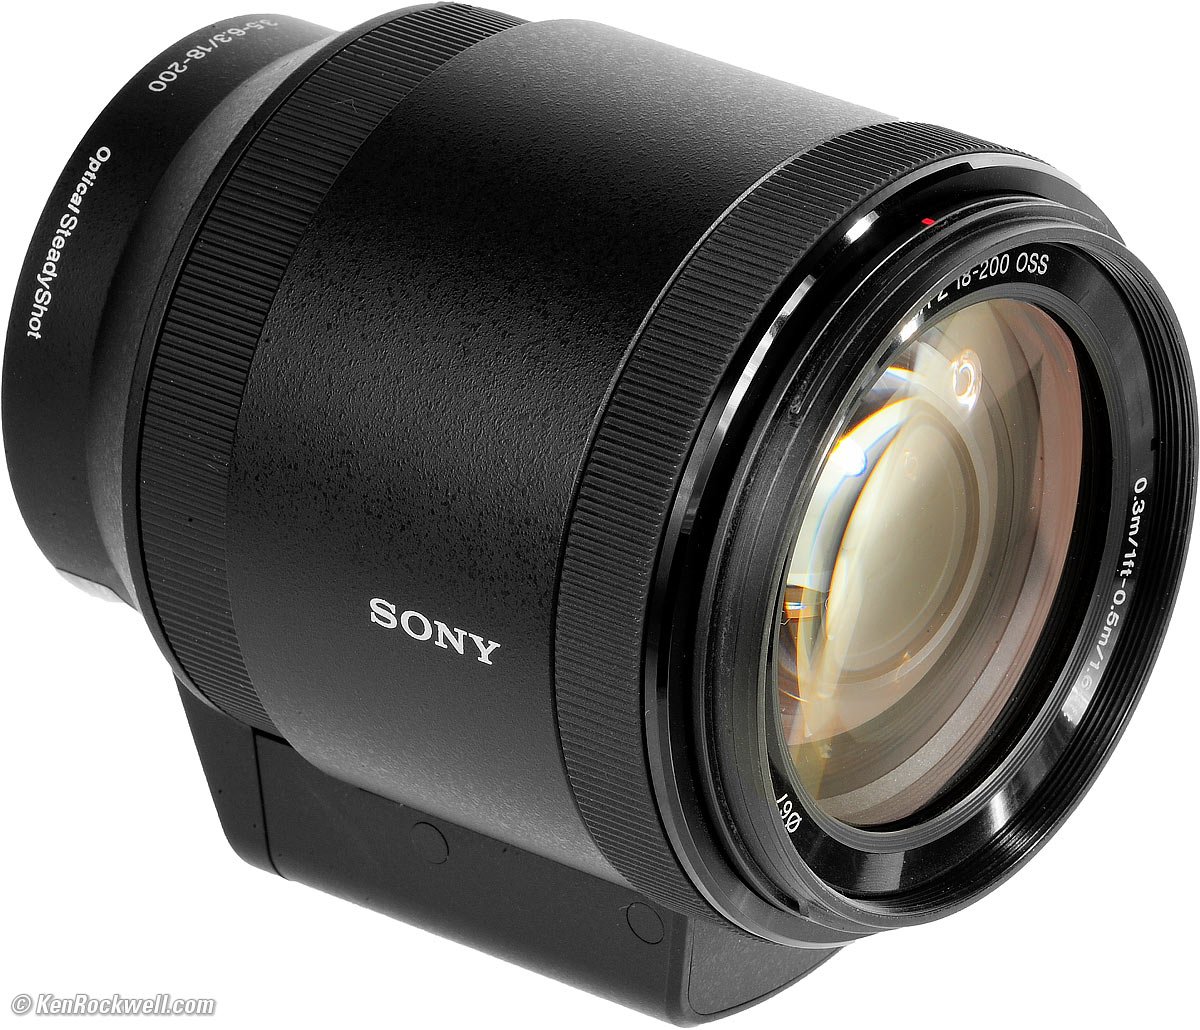 Sony 18-200mm PZ Review